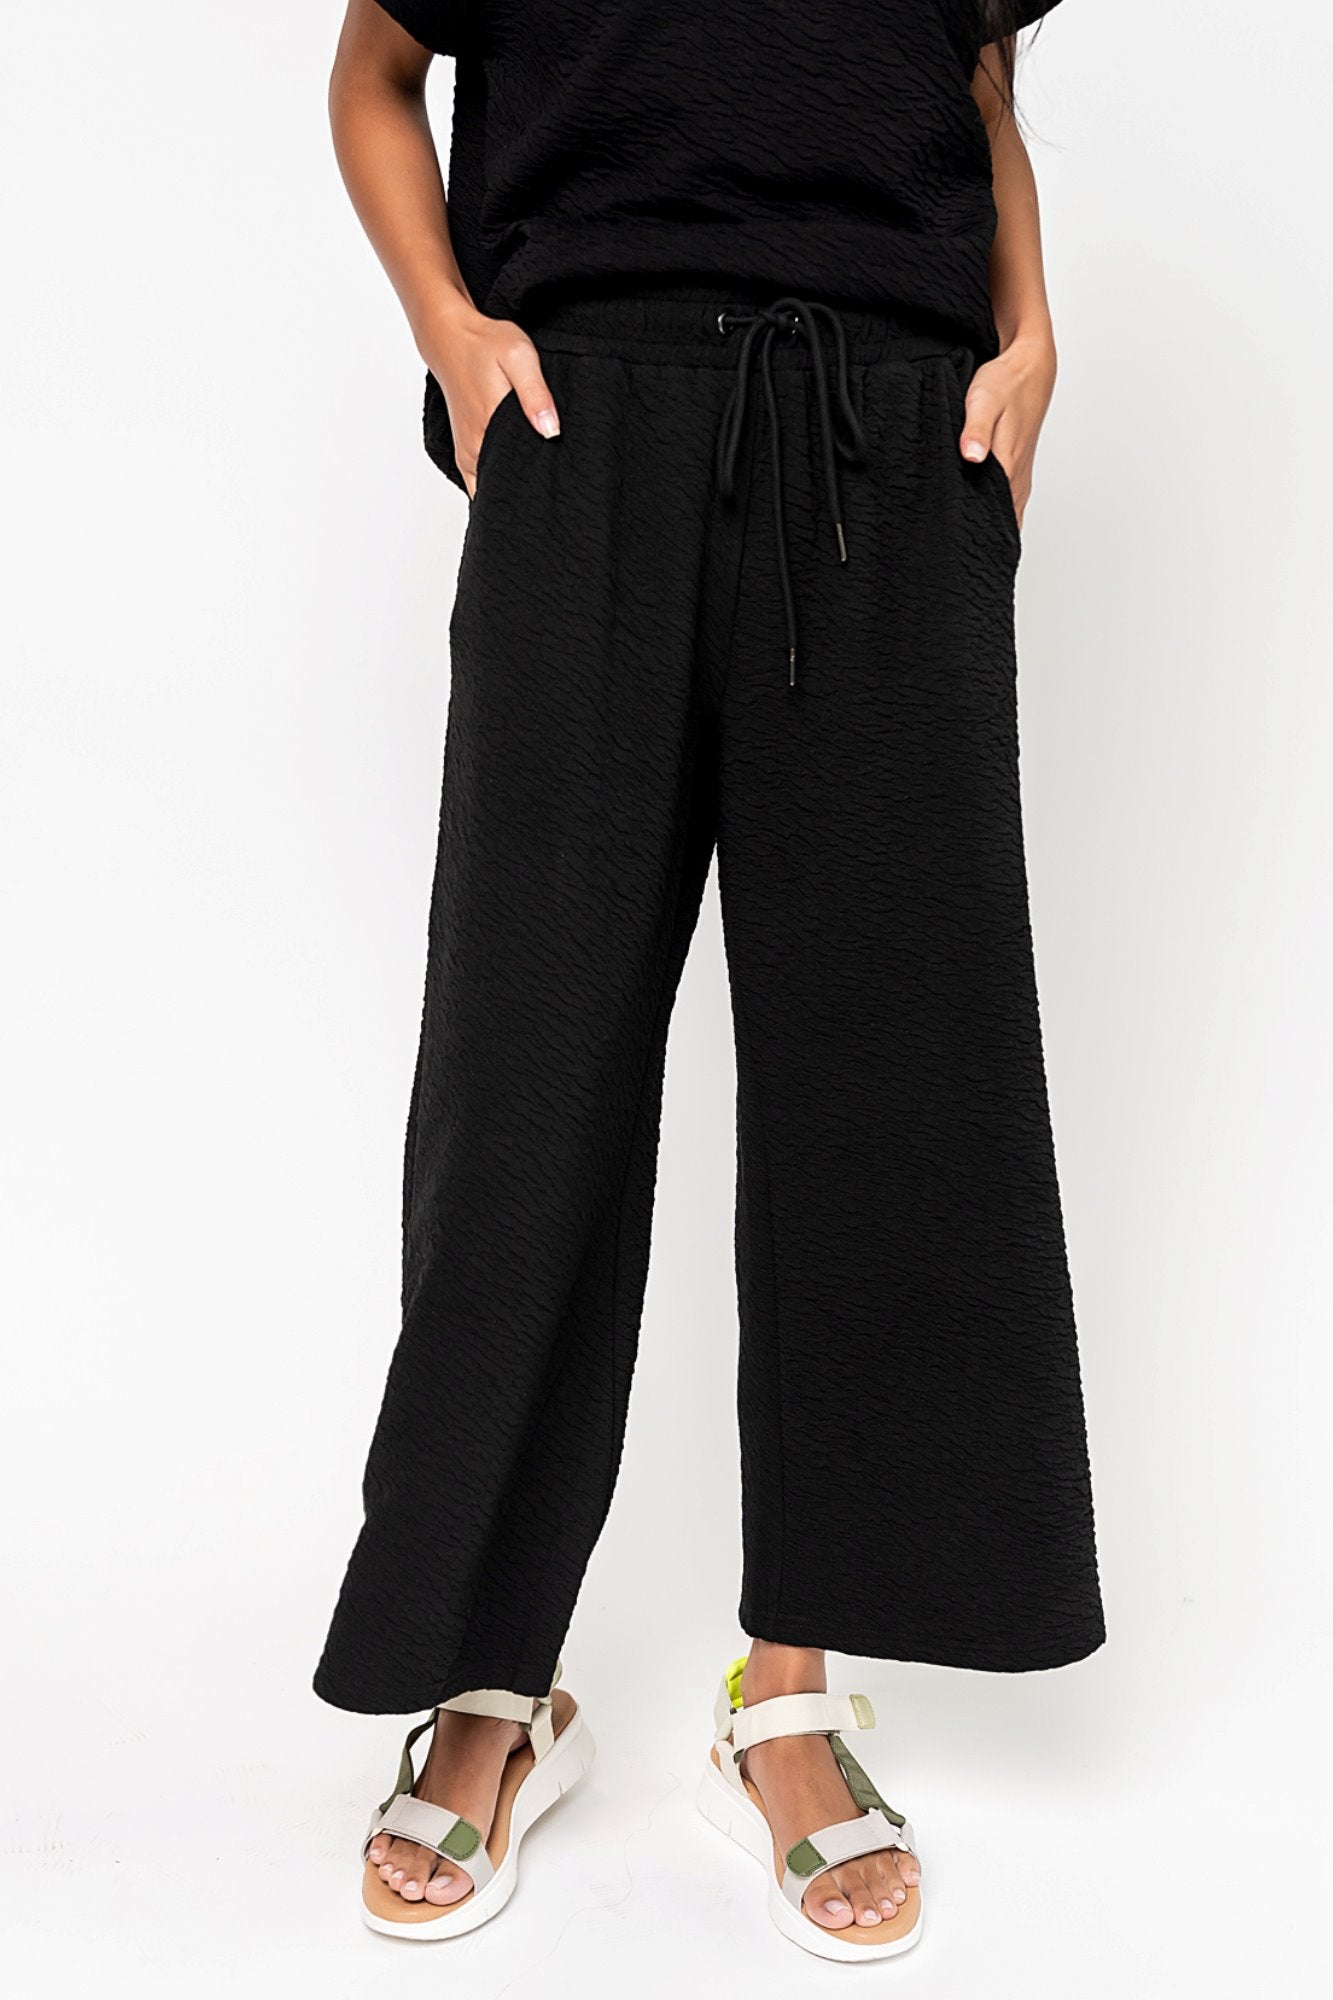 Gentry Pants Holley Girl 